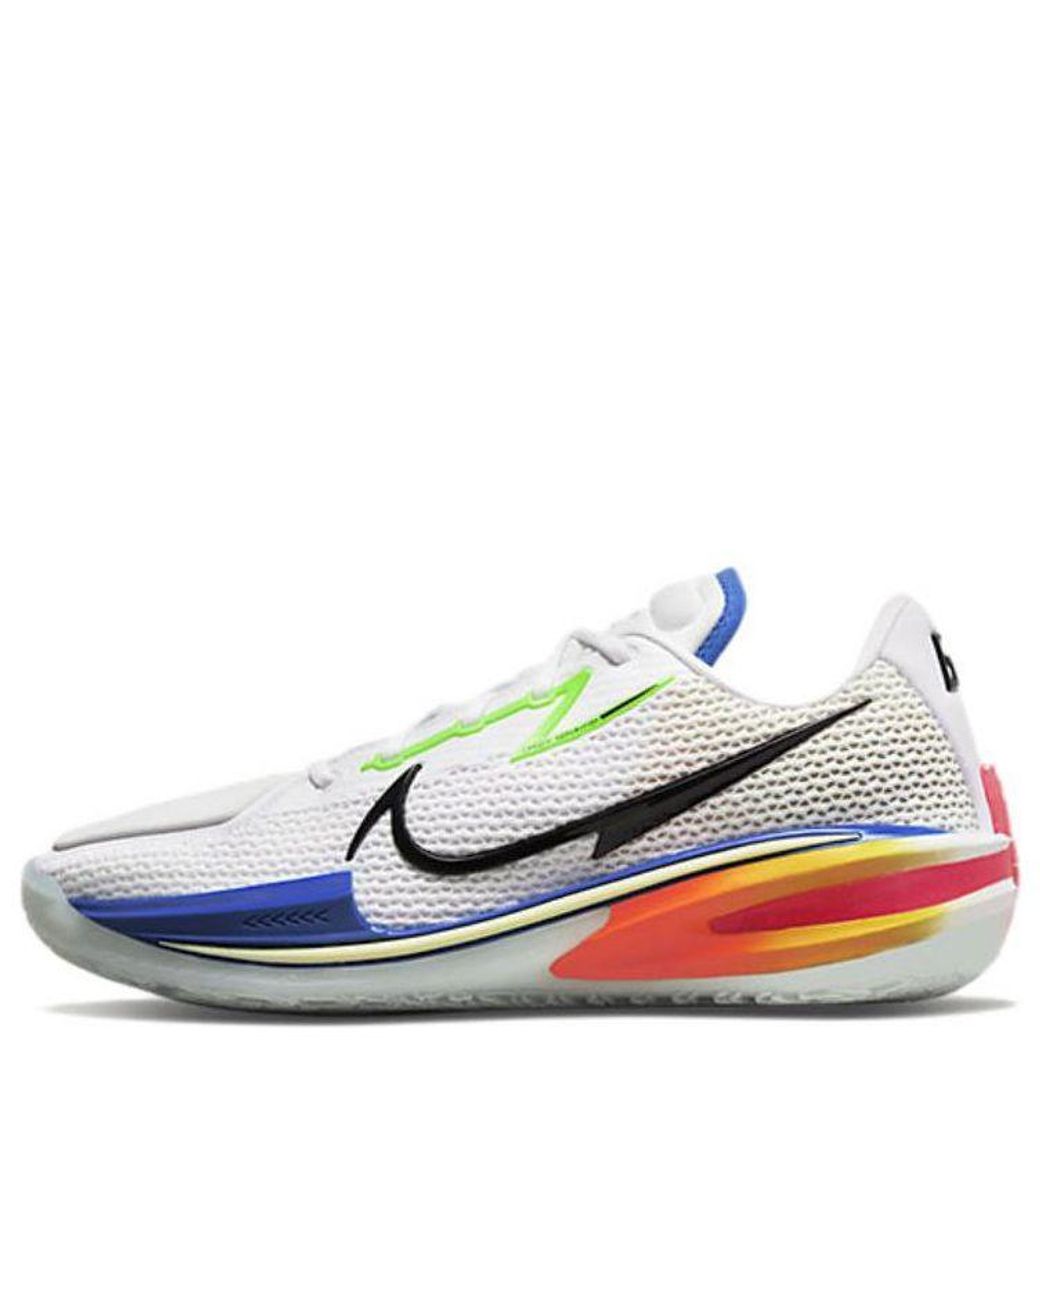 Nike Air Zoom G.t. Cut Ep Shock Absorption Wear-resistant Low Top Shoes White Blue Gray China Version | Lyst